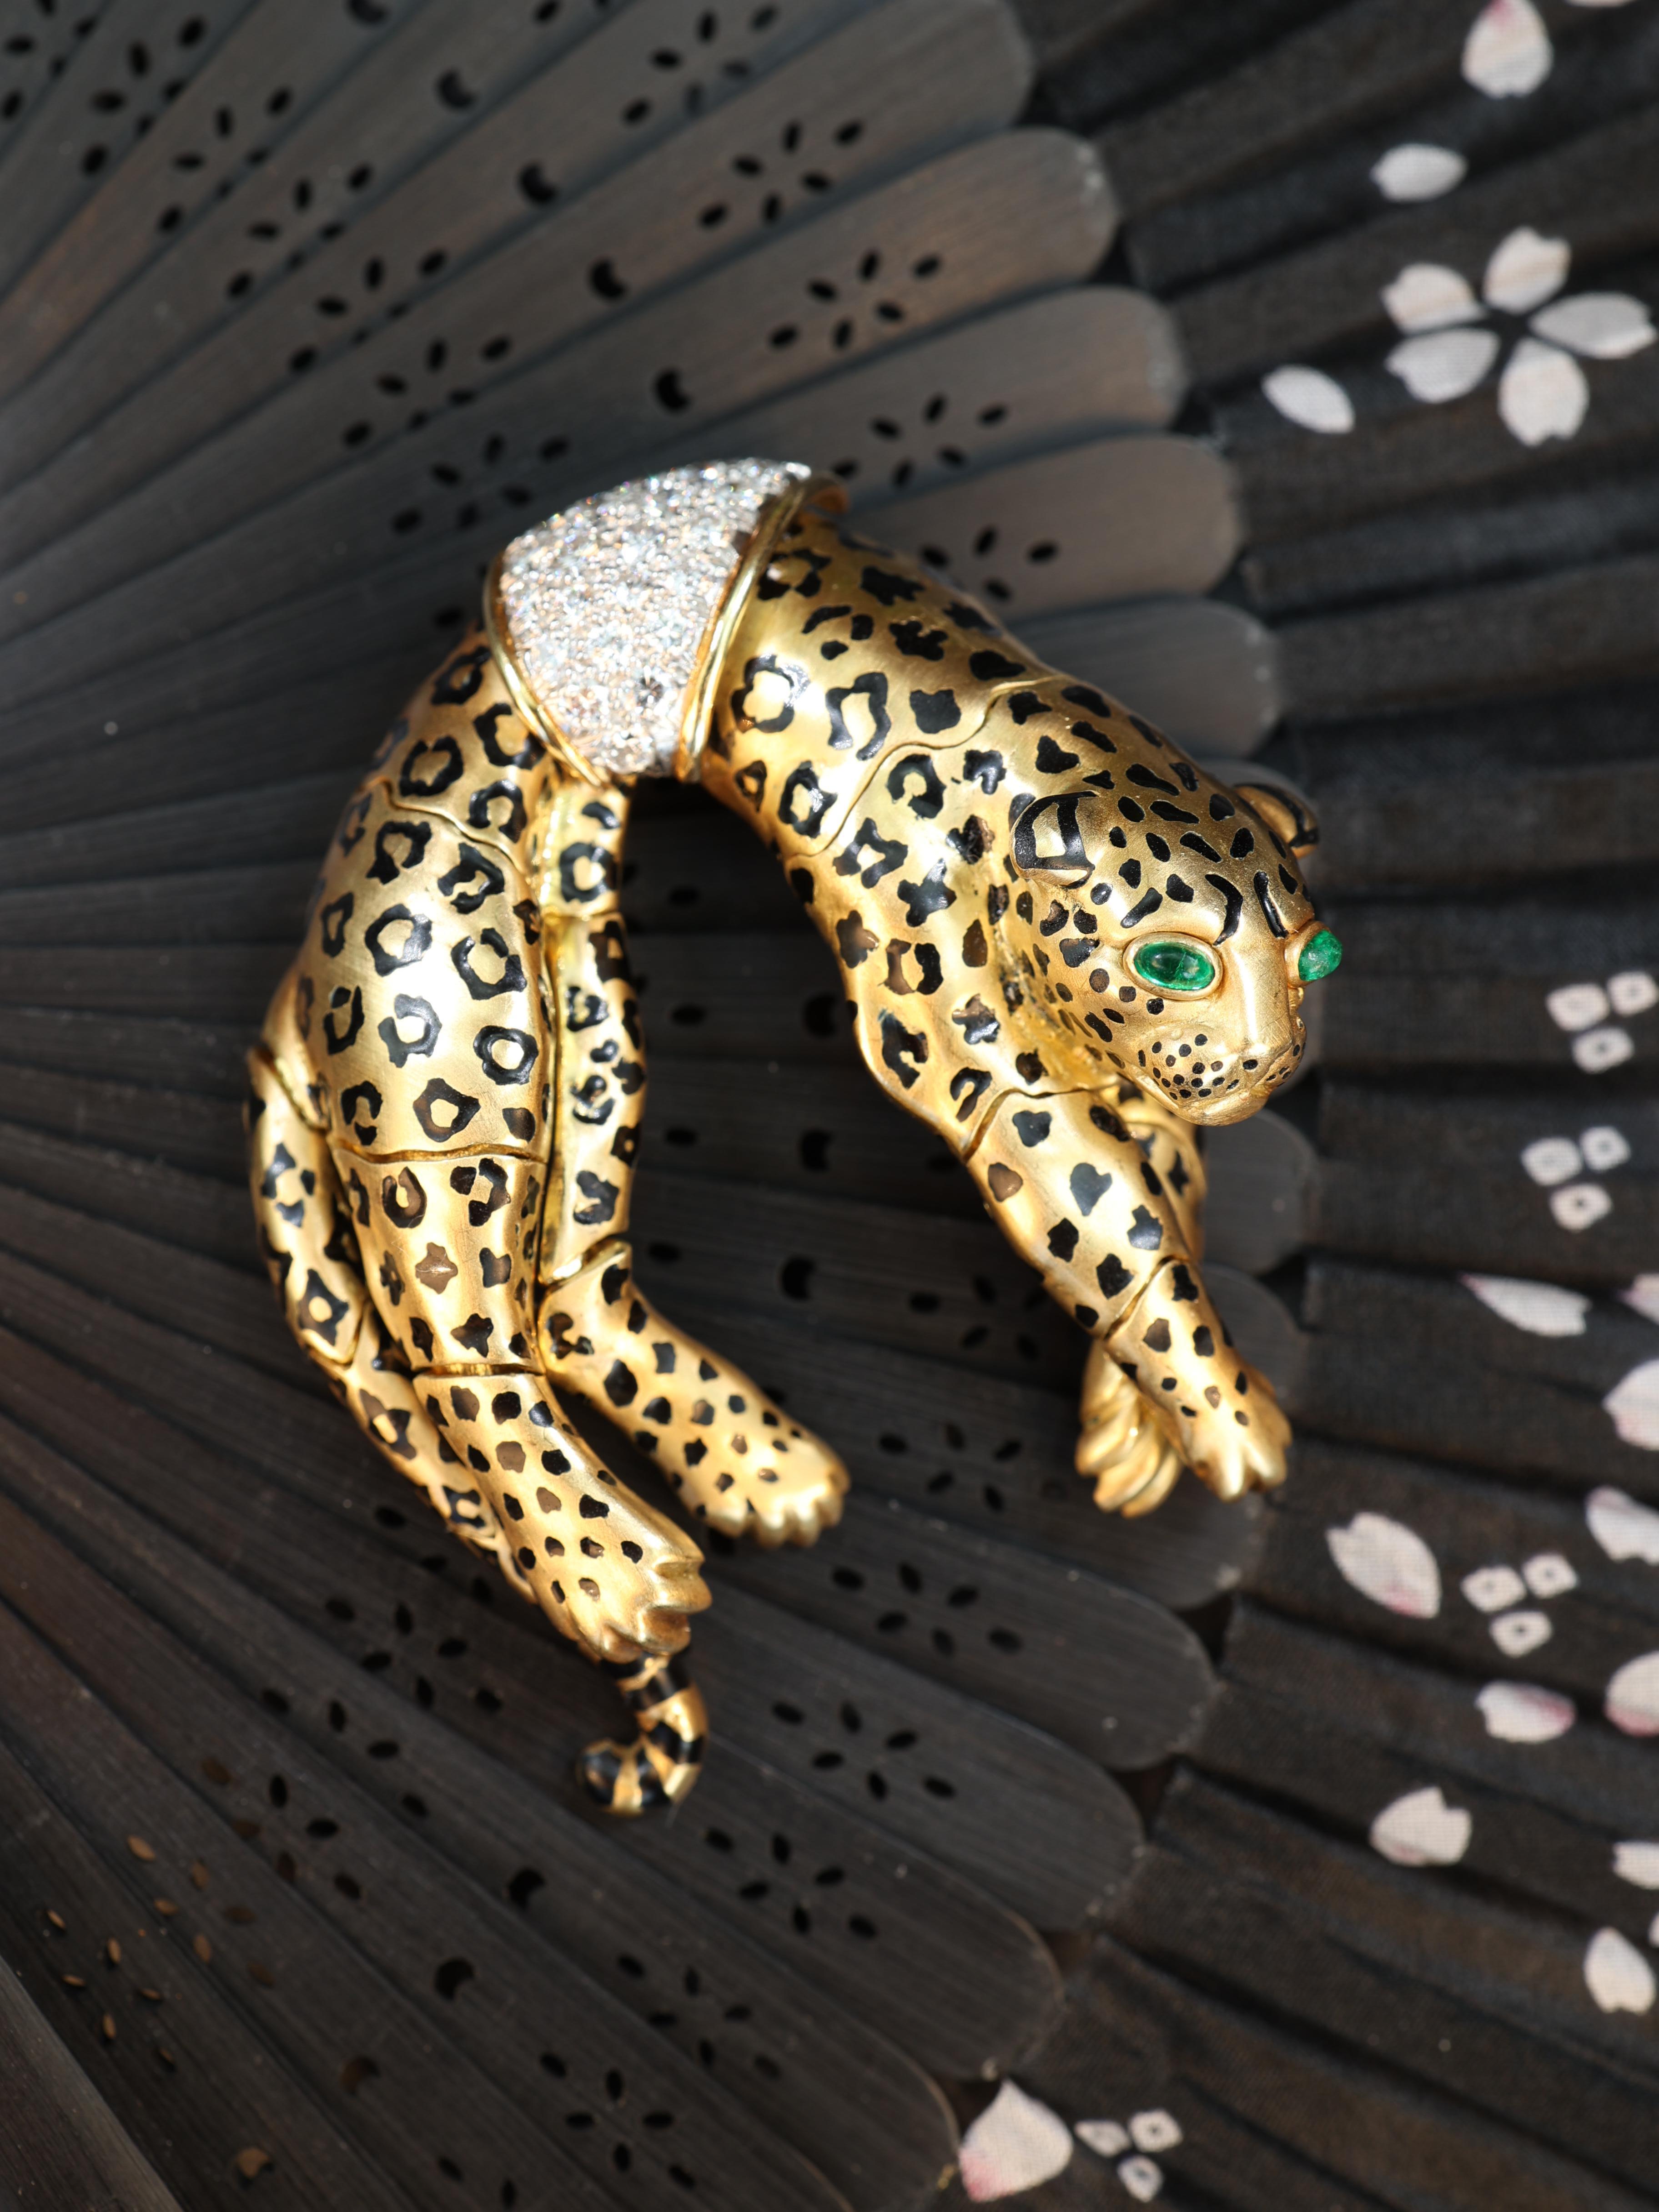 This vivid emerald diamond panther brooch is crafted in 18K gold and platinum. The panther's eyes are decorated with two emeralds approx. 0.04ct in total. There are 25 shining round-cut diamonds decorated on the waist of the panther, total approx.